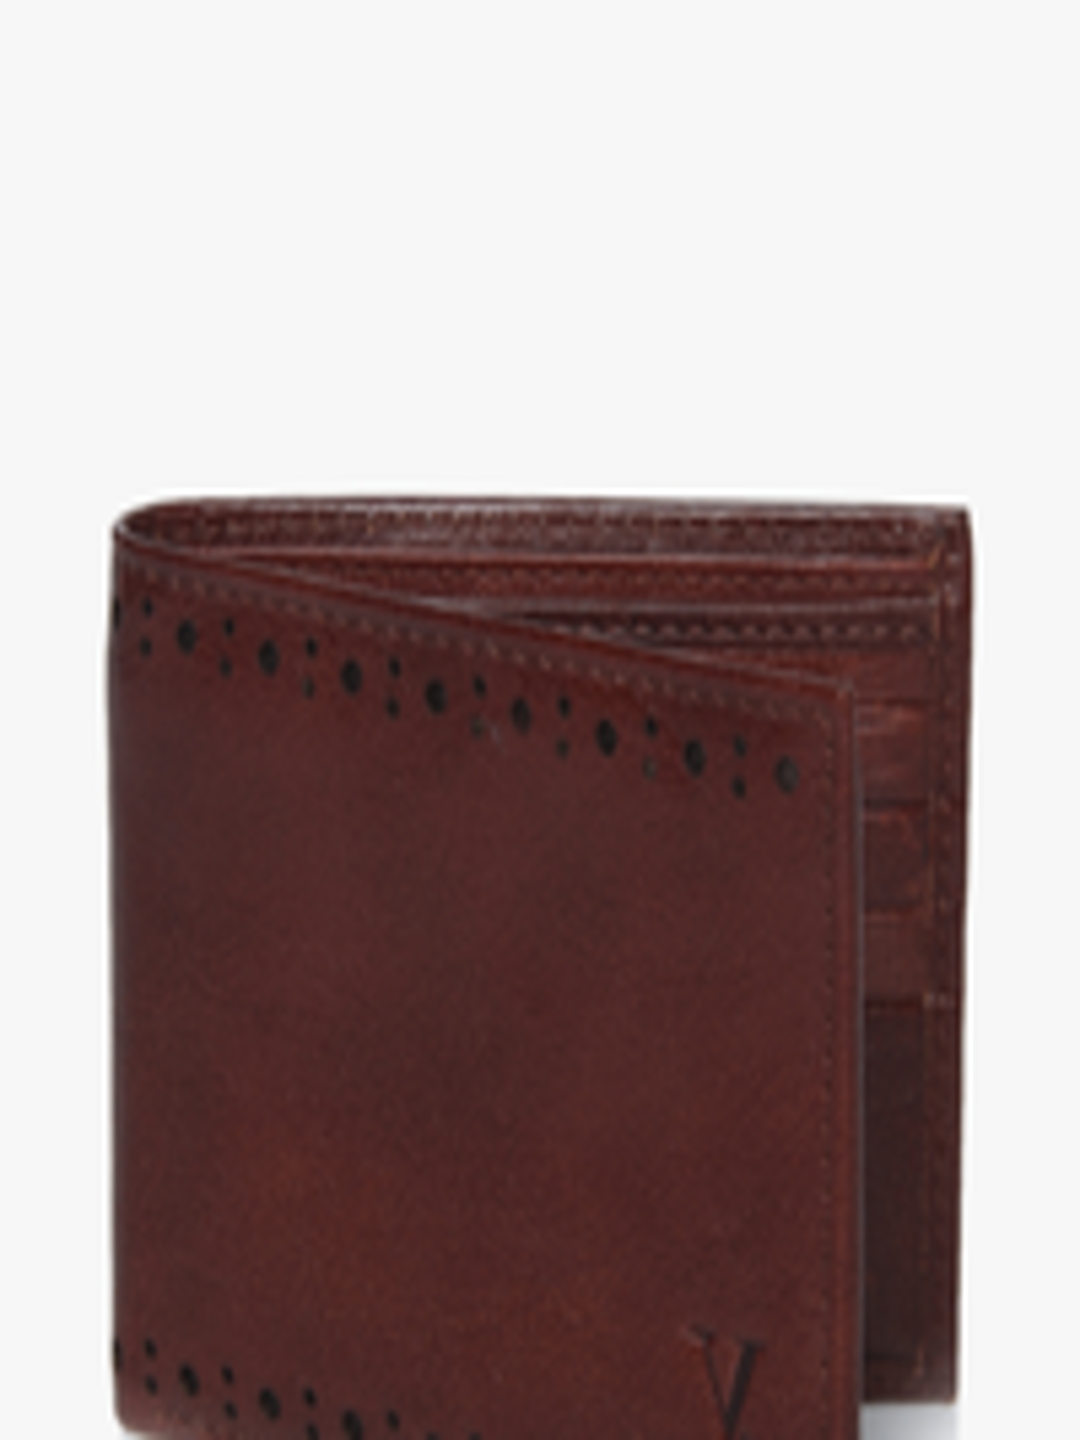 Buy Brown Leather Wallet - Wallets for Men 7985615 | Myntra